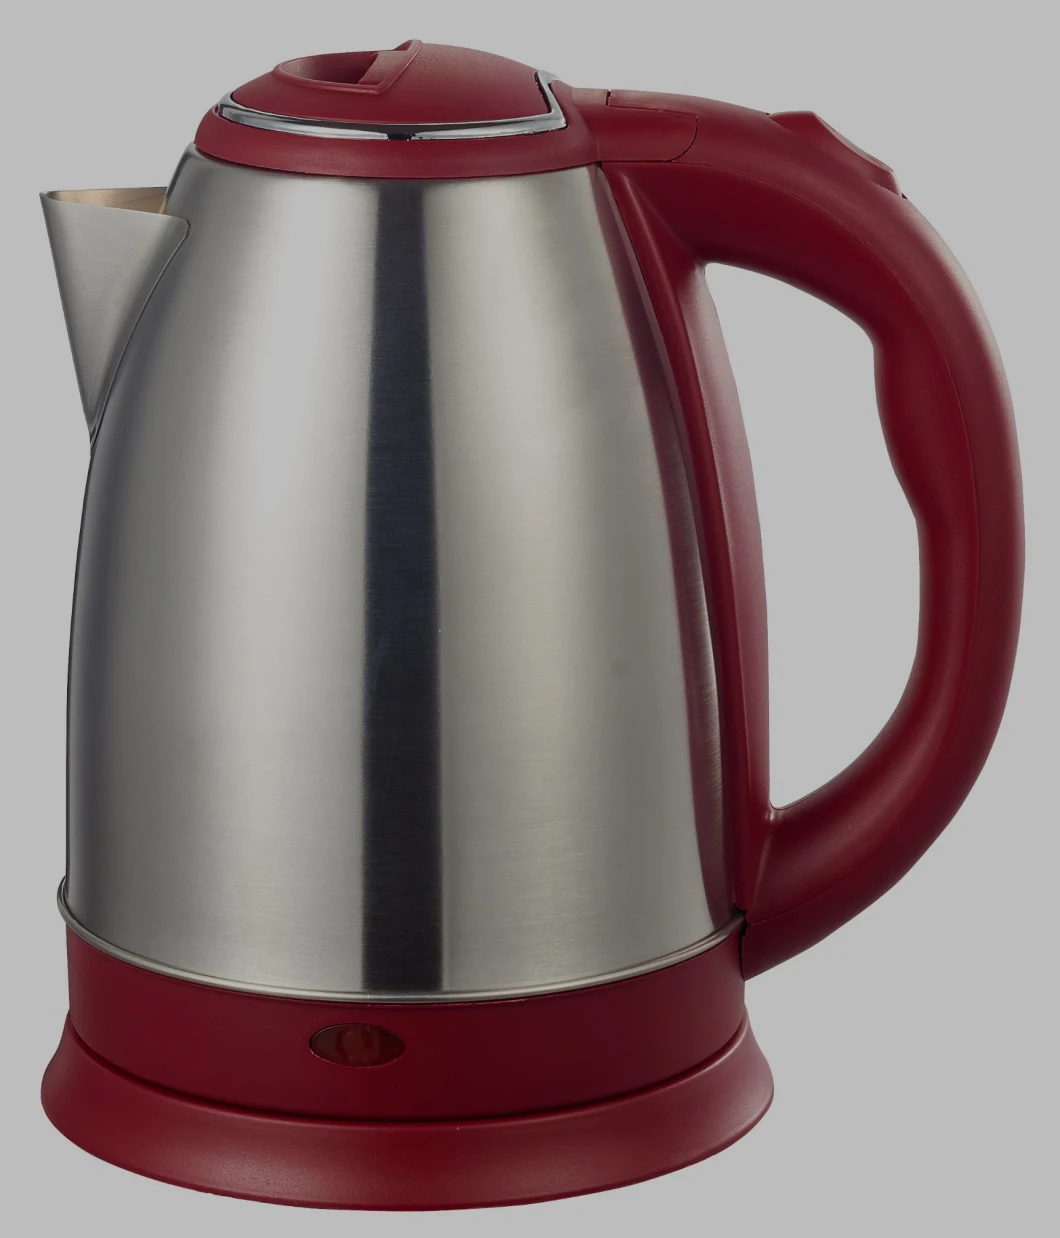 Hot-Selling Kettle 1.8L Polished Chassis 360 Rotating Stainless Steel Electric Kettle Automatically Power off